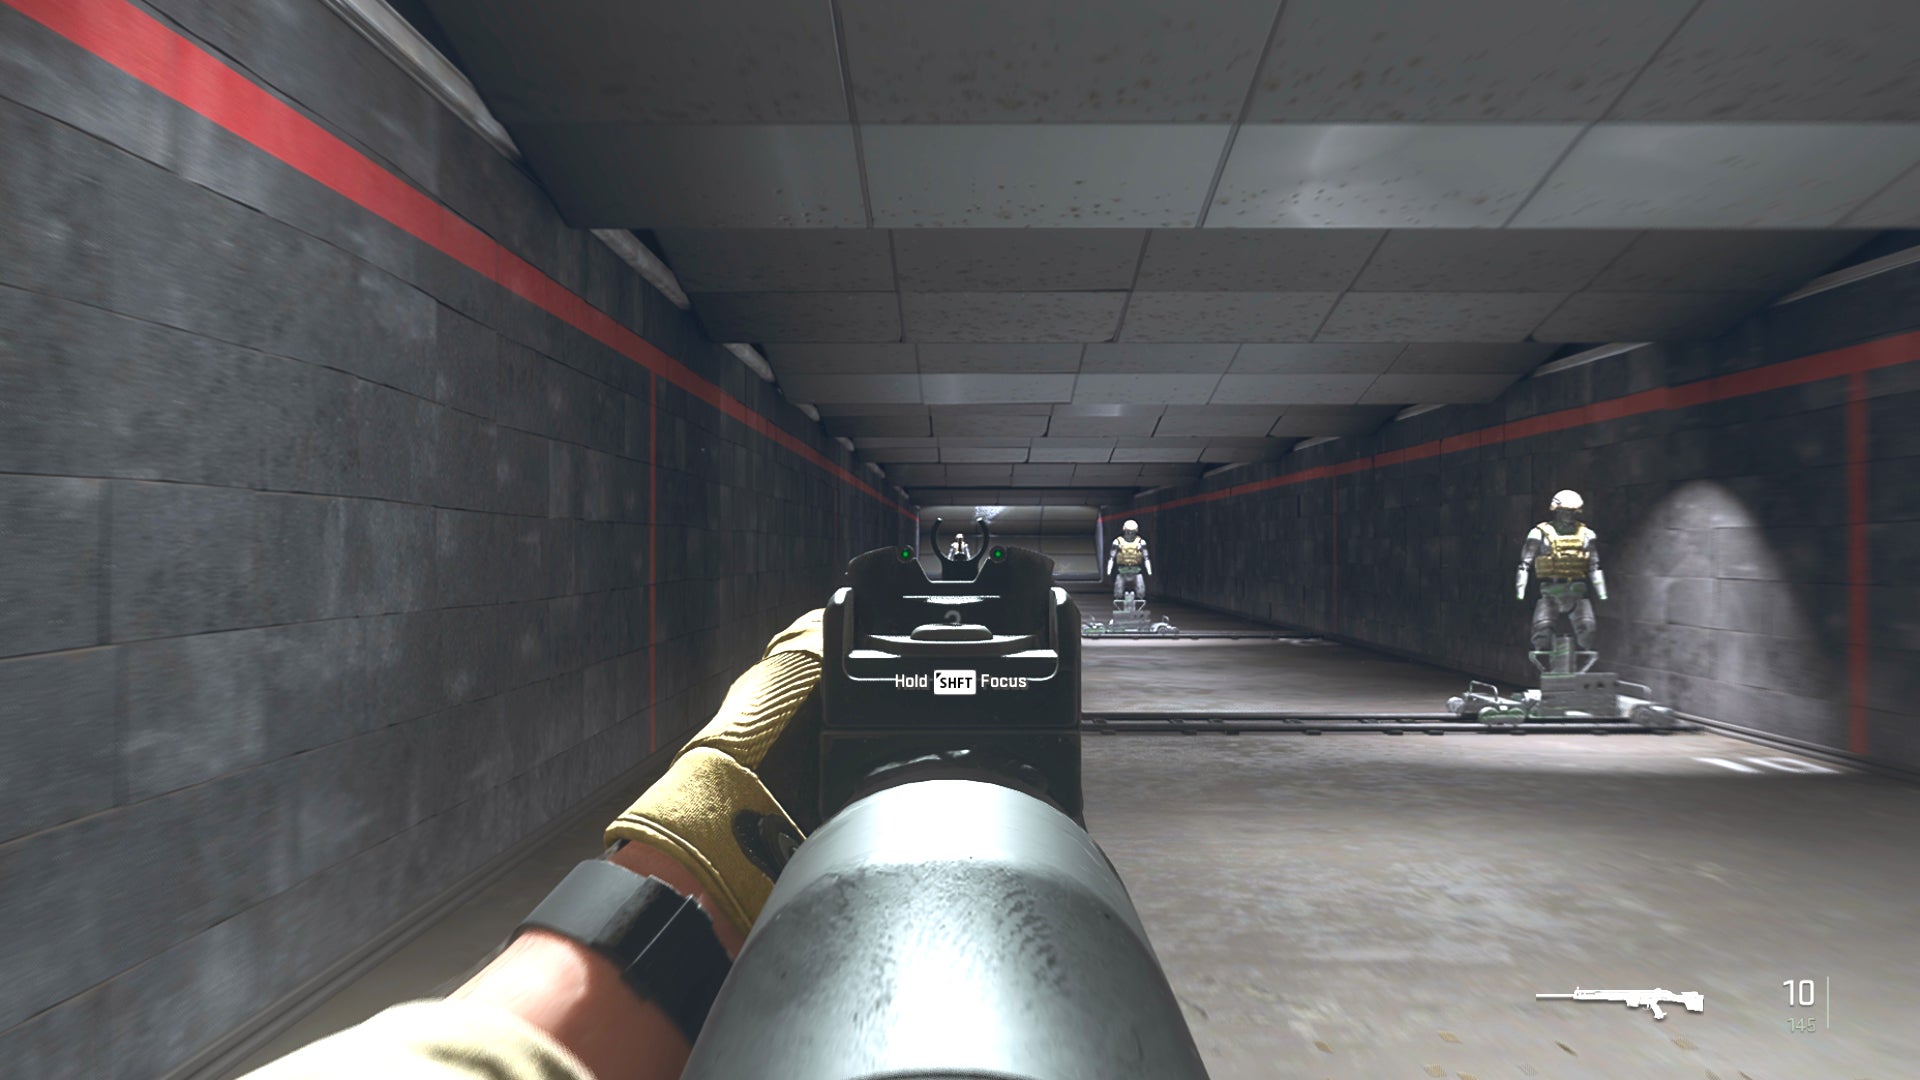 The player in Warzone 2.0 aims at a training dummy with the LM-S ironsights.